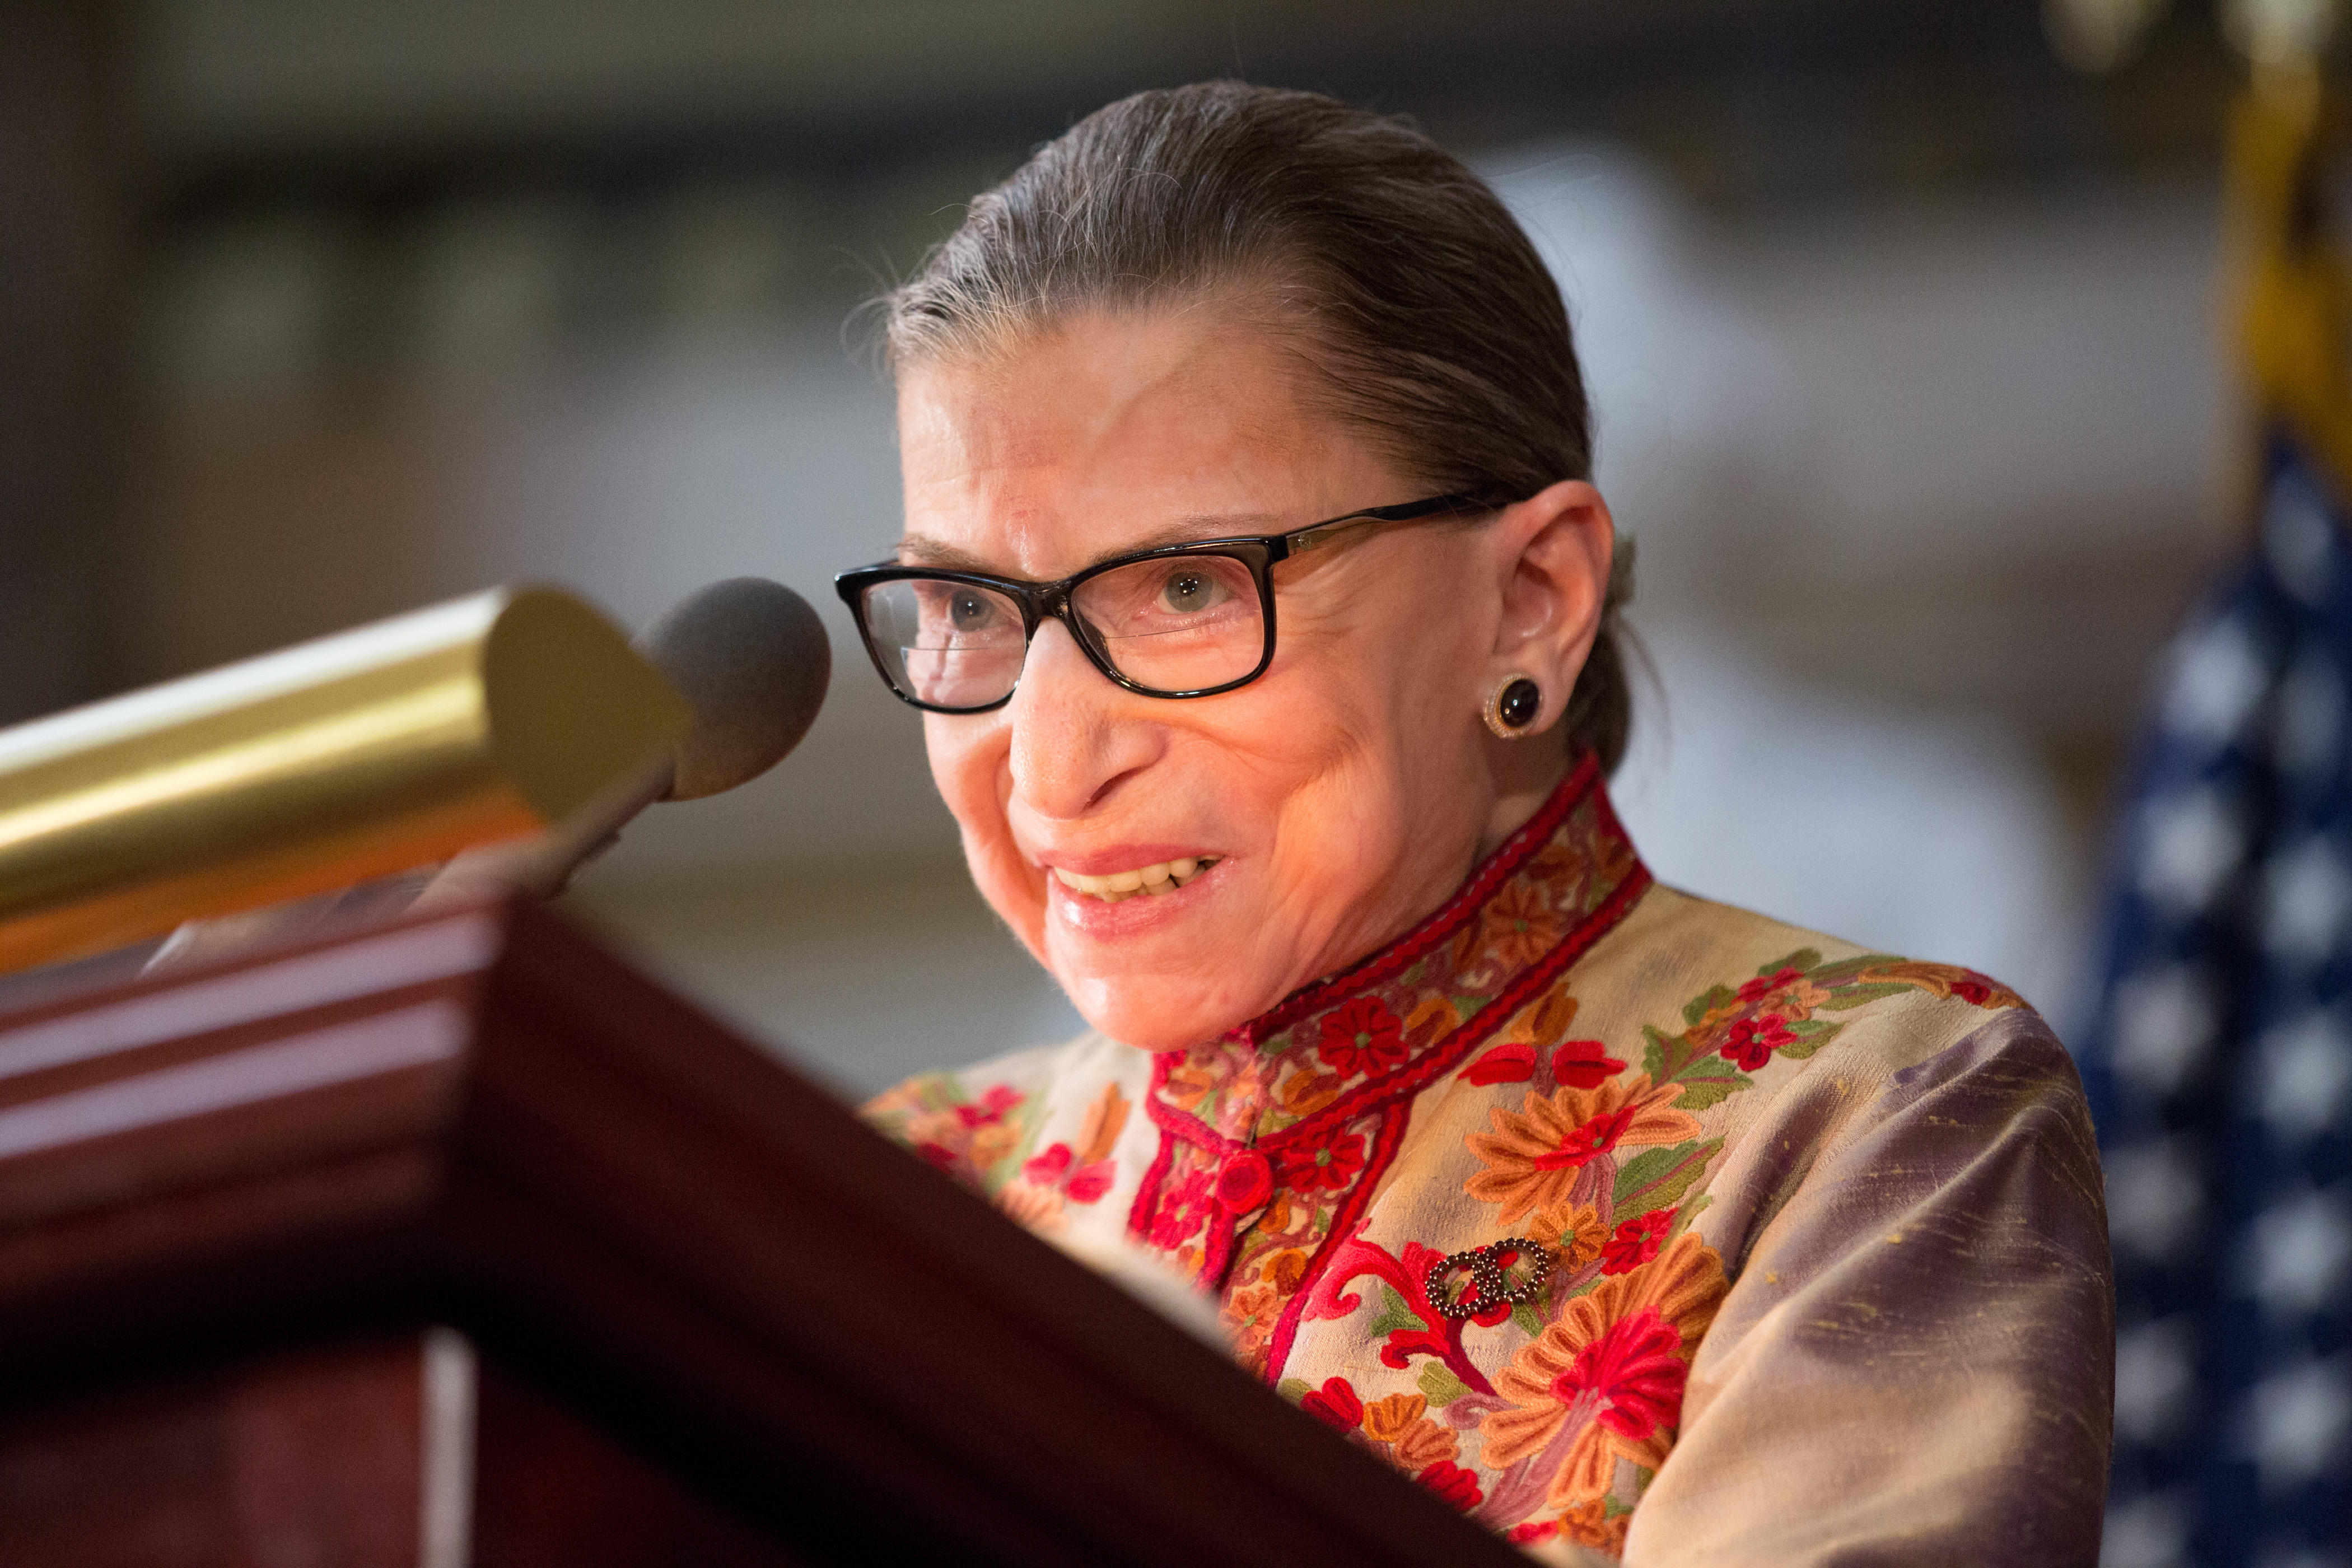 U.S. Supreme Court Justice Ruth Bader Ginsburg speaks at an annual Women's History Month reception hosted by Pelosi in the U.S. capitol building on Capitol Hill in Washington, D.C. on March 18. (Allison Shelley—Getty Images)